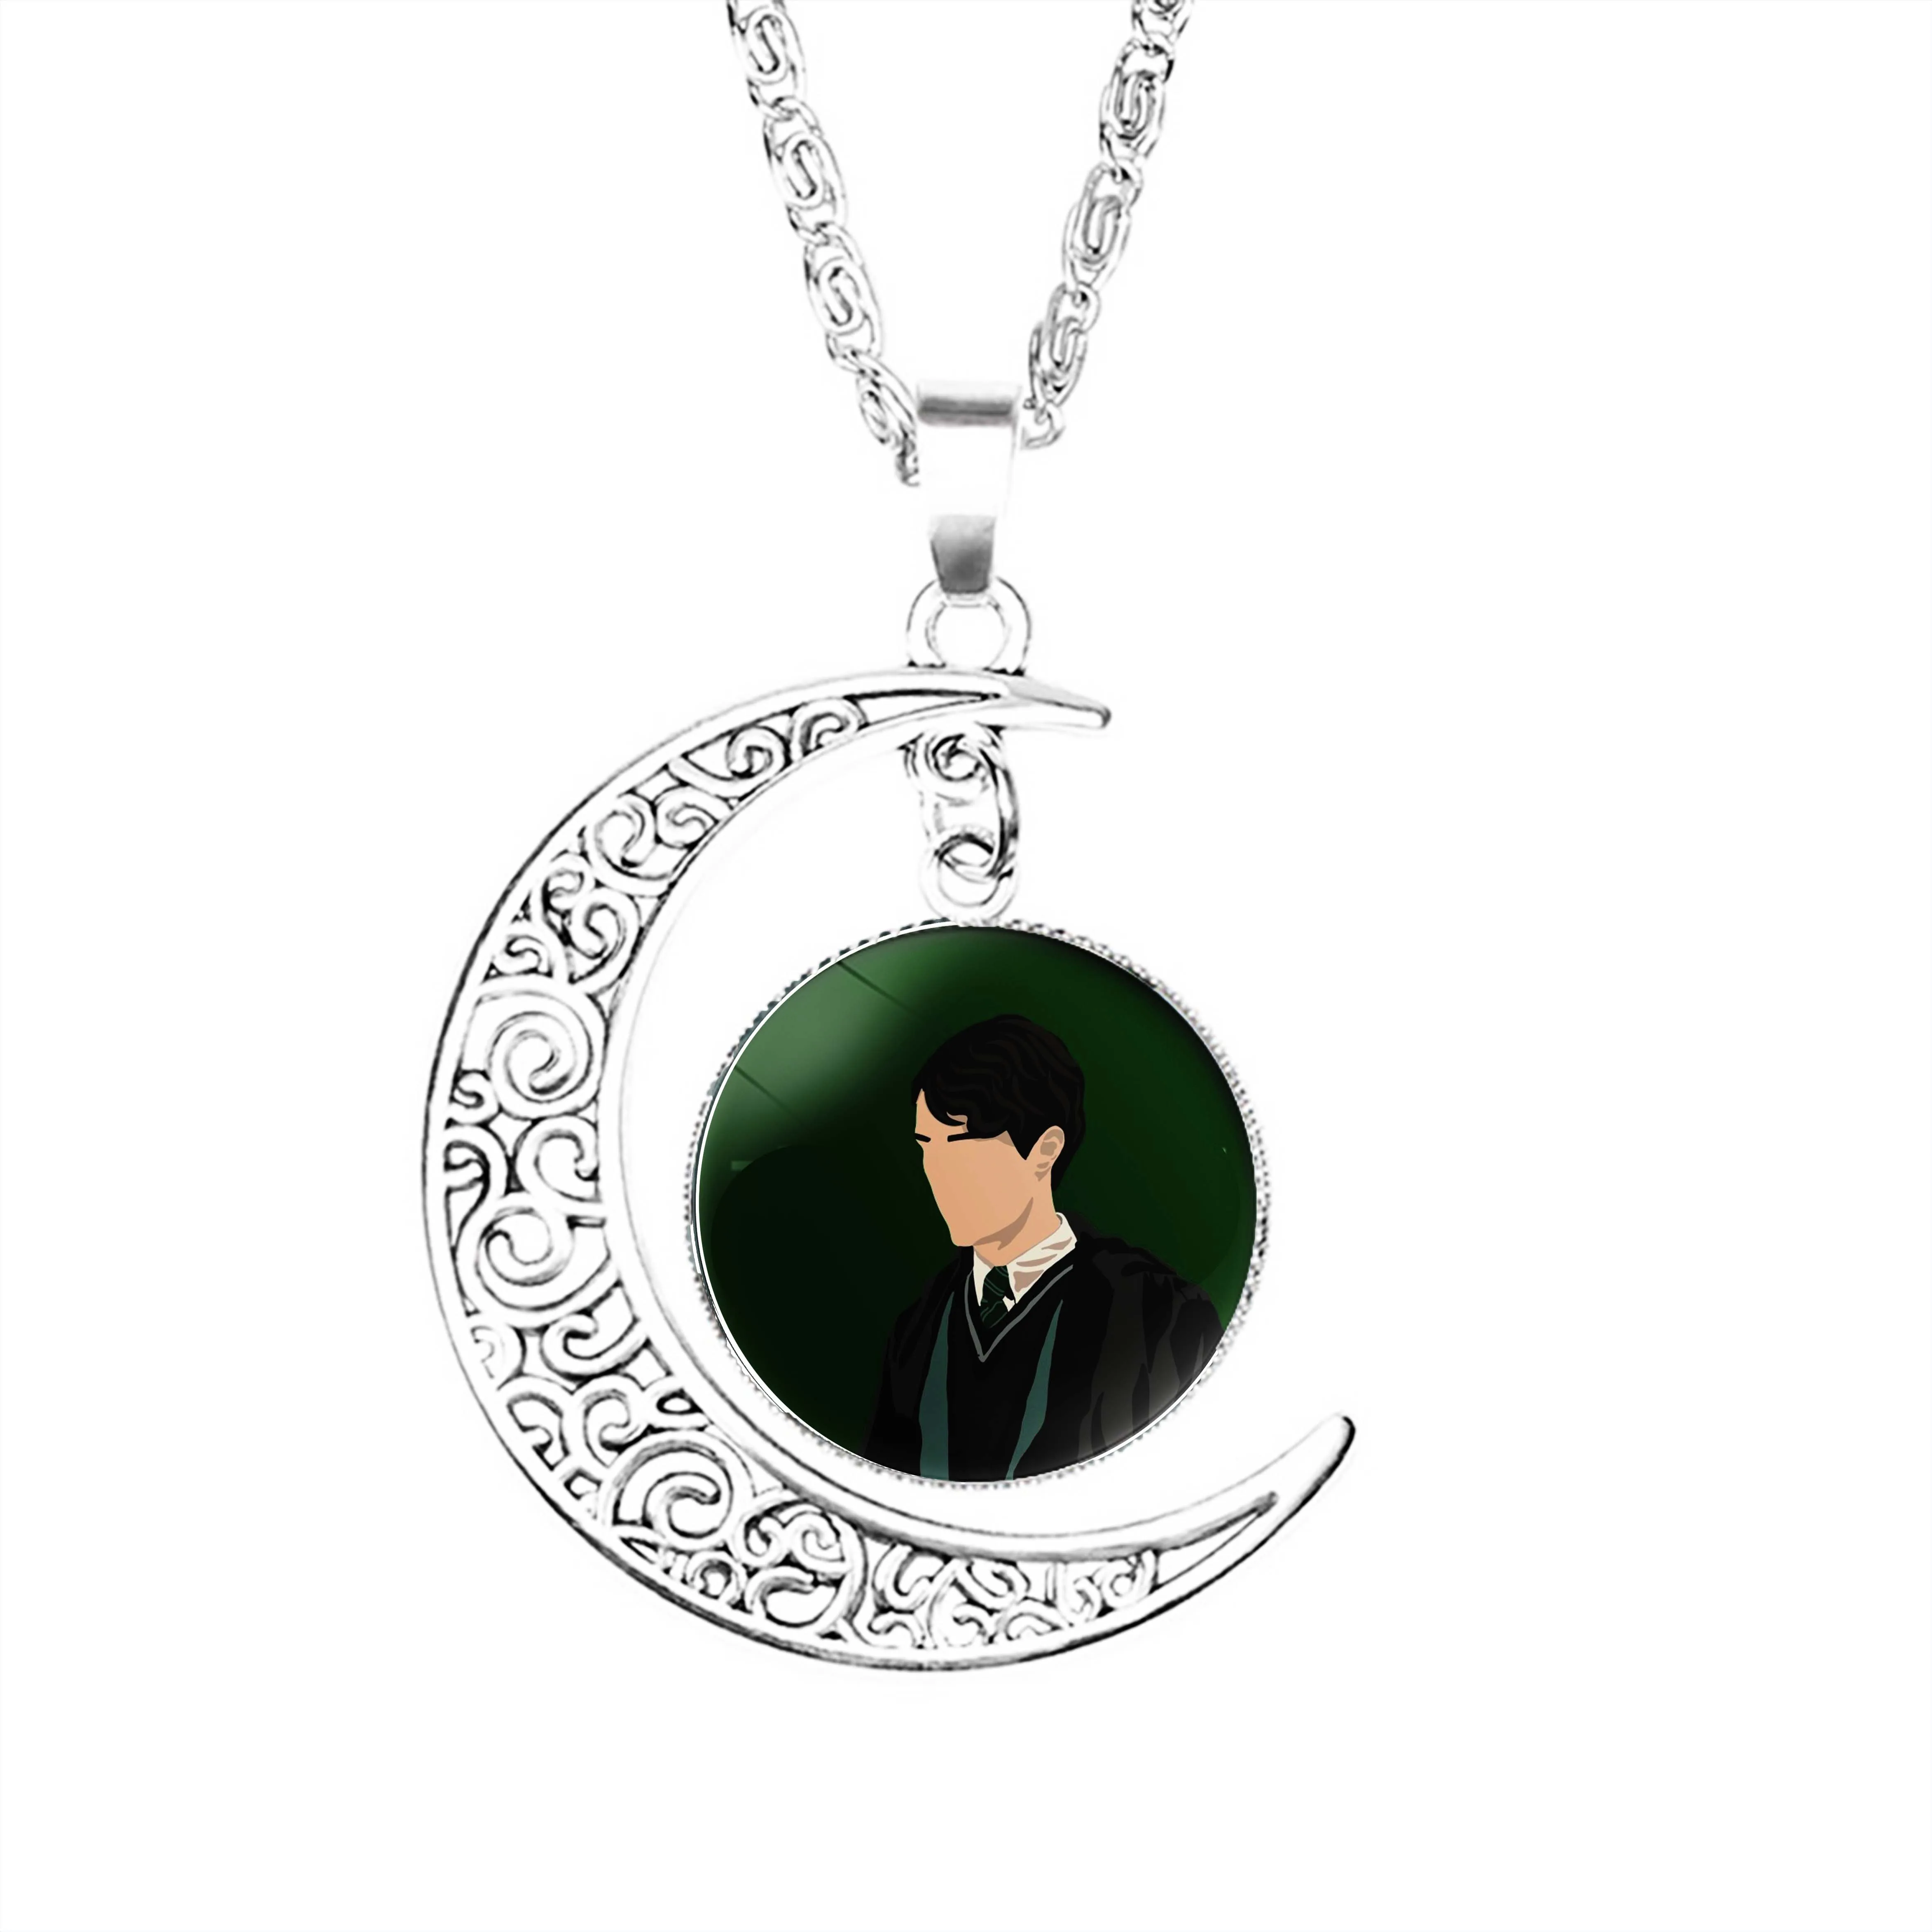 

Tom Riddle Moon Necklace Glass Girls Dome Stainless Steel Chain Women Pendant Lady Lovers Gifts Accessories Party Jewelry Men